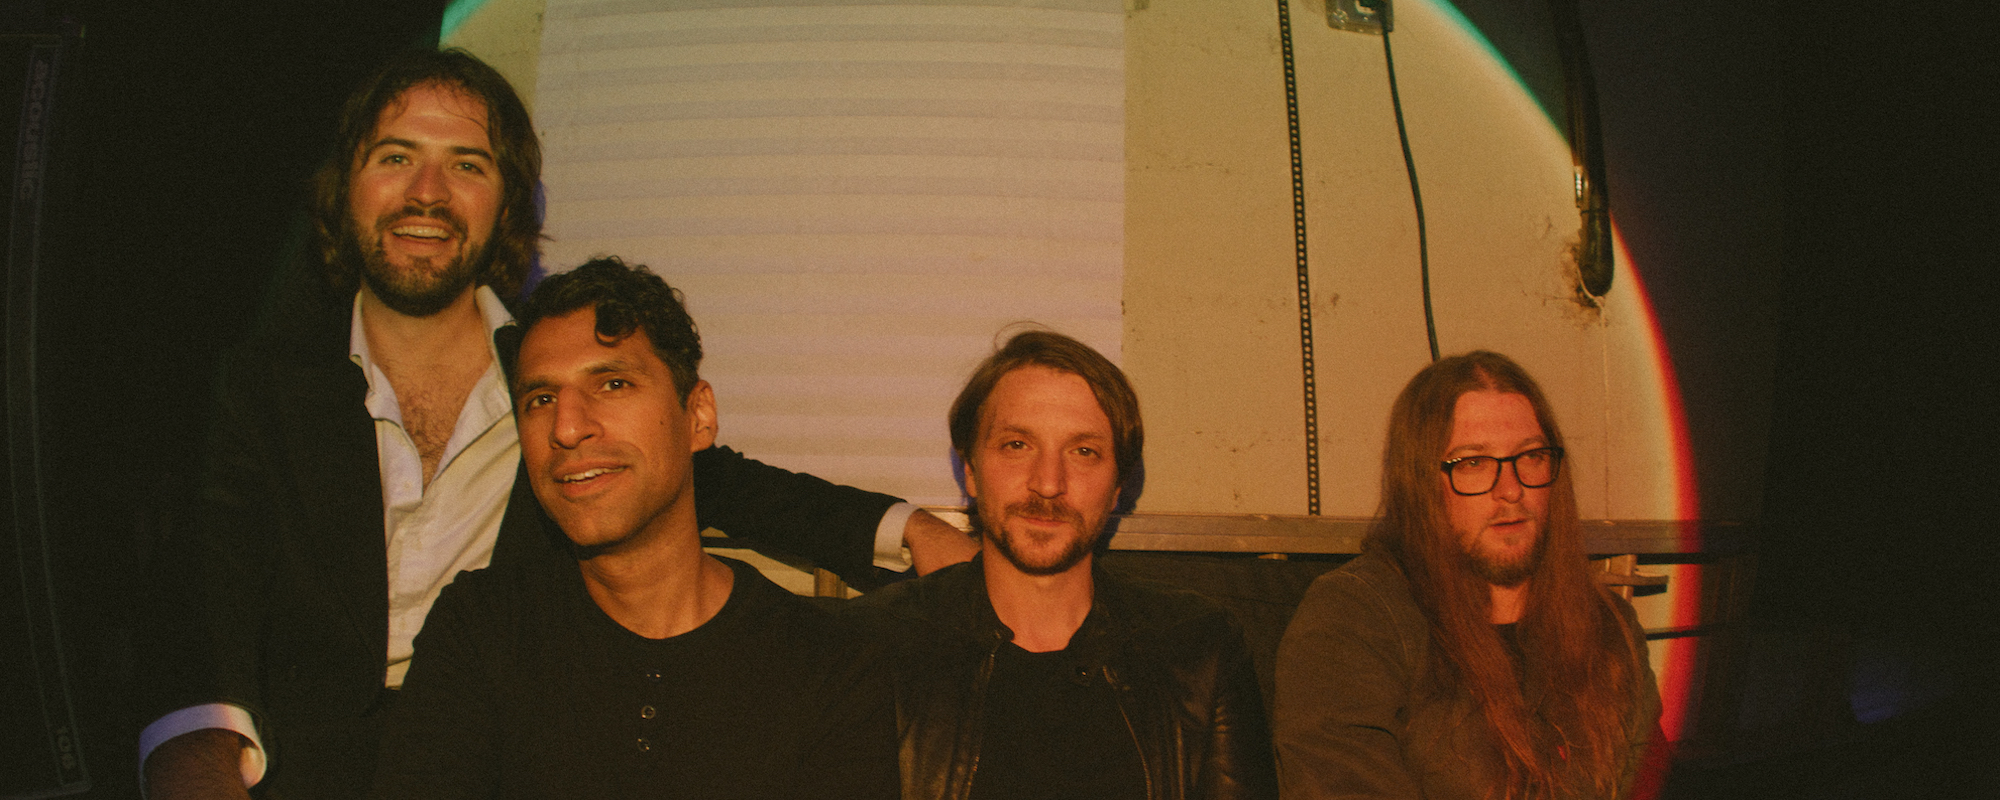 The Wans Fan the Spells of Love on “Magical Touch,” Off Their Forthcoming Album